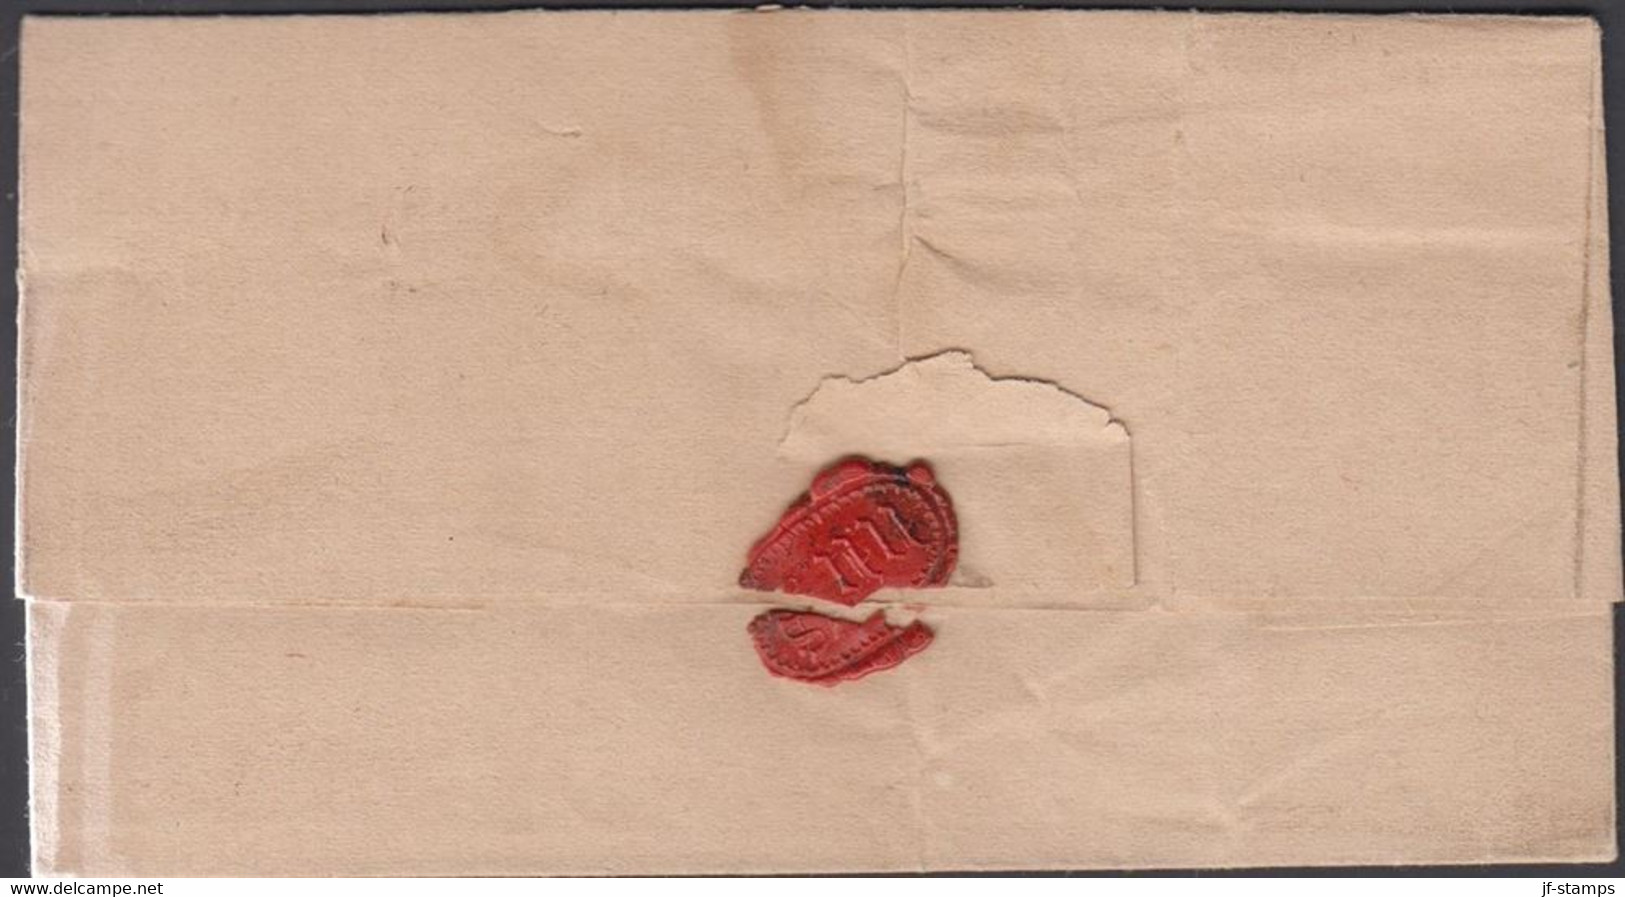 1867. NORGE. Small Cover (fold) To Gjøvik Cancelled CHRISTIANIA BYPOST 1867 + CHRISTIANIA. Dated Nydalen I... - JF427623 - ...-1855 Vorphilatelie